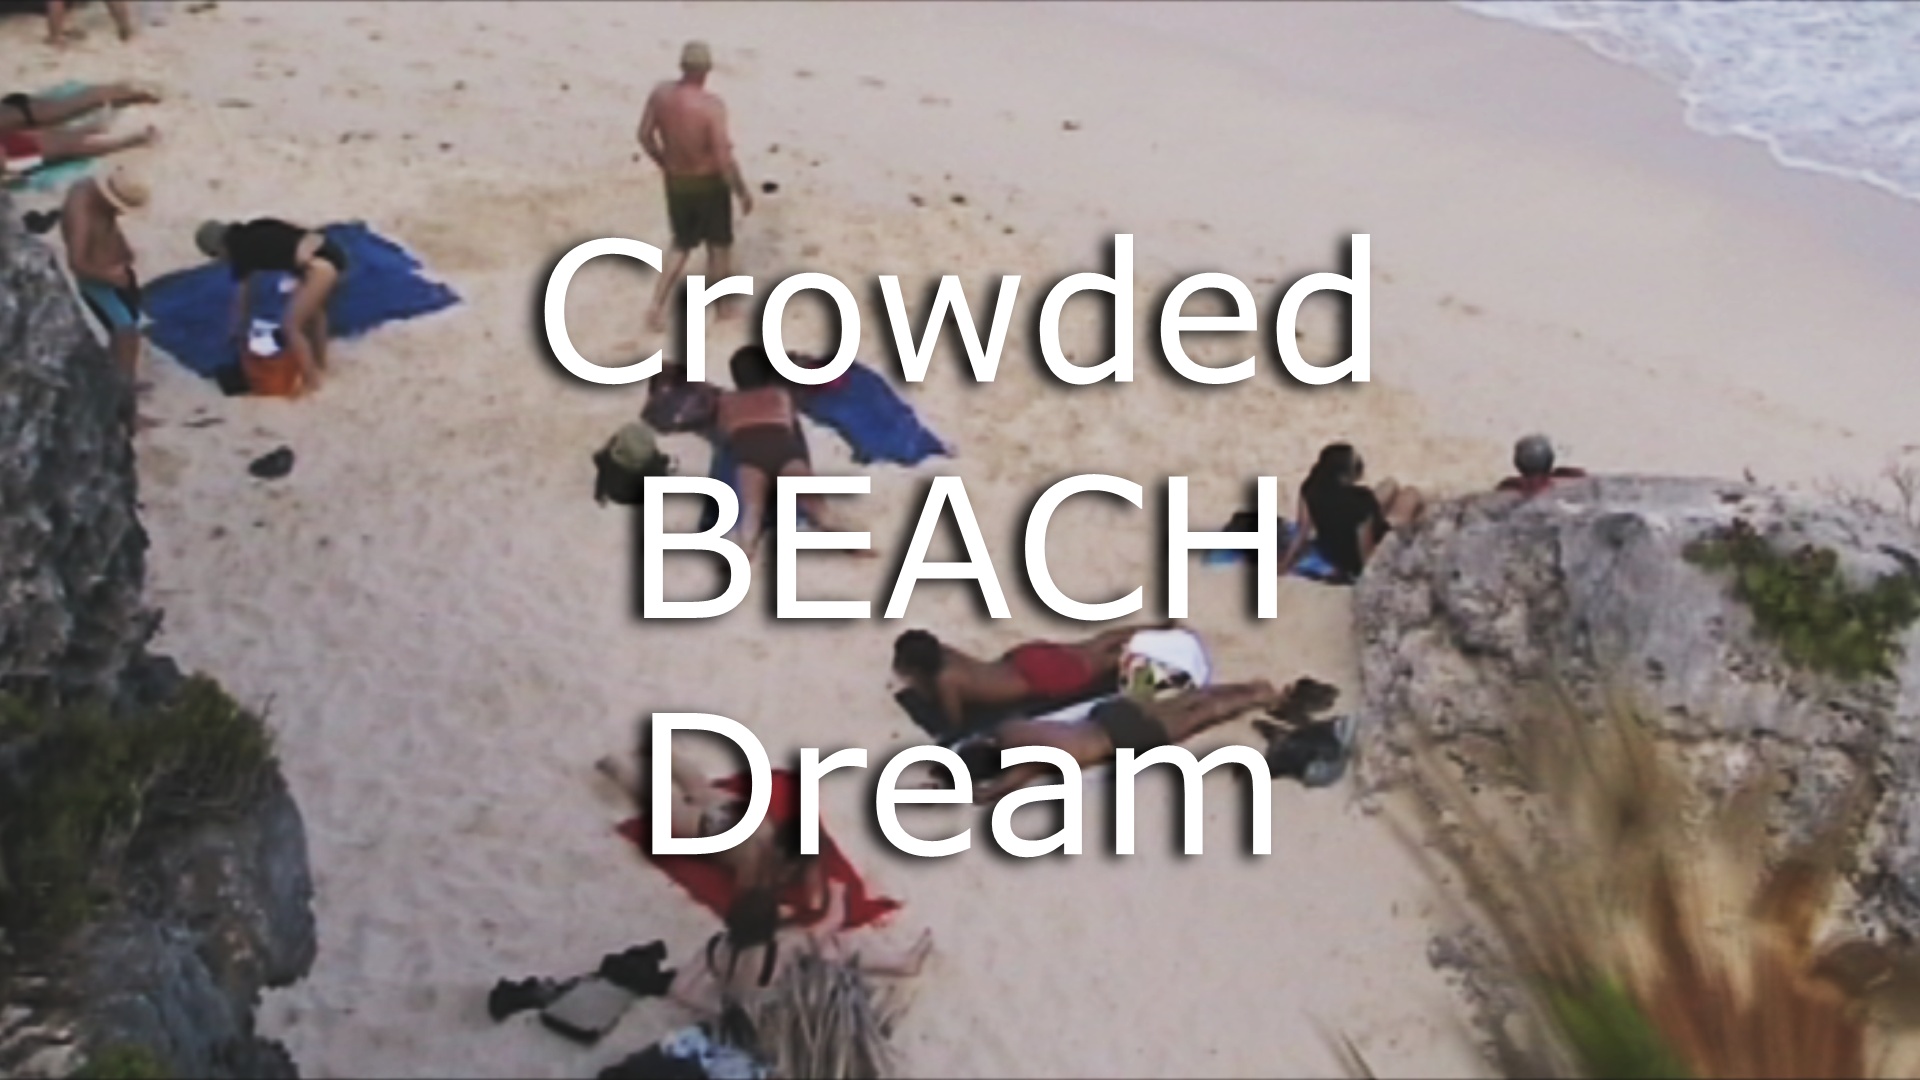 crowded beach dream meaning